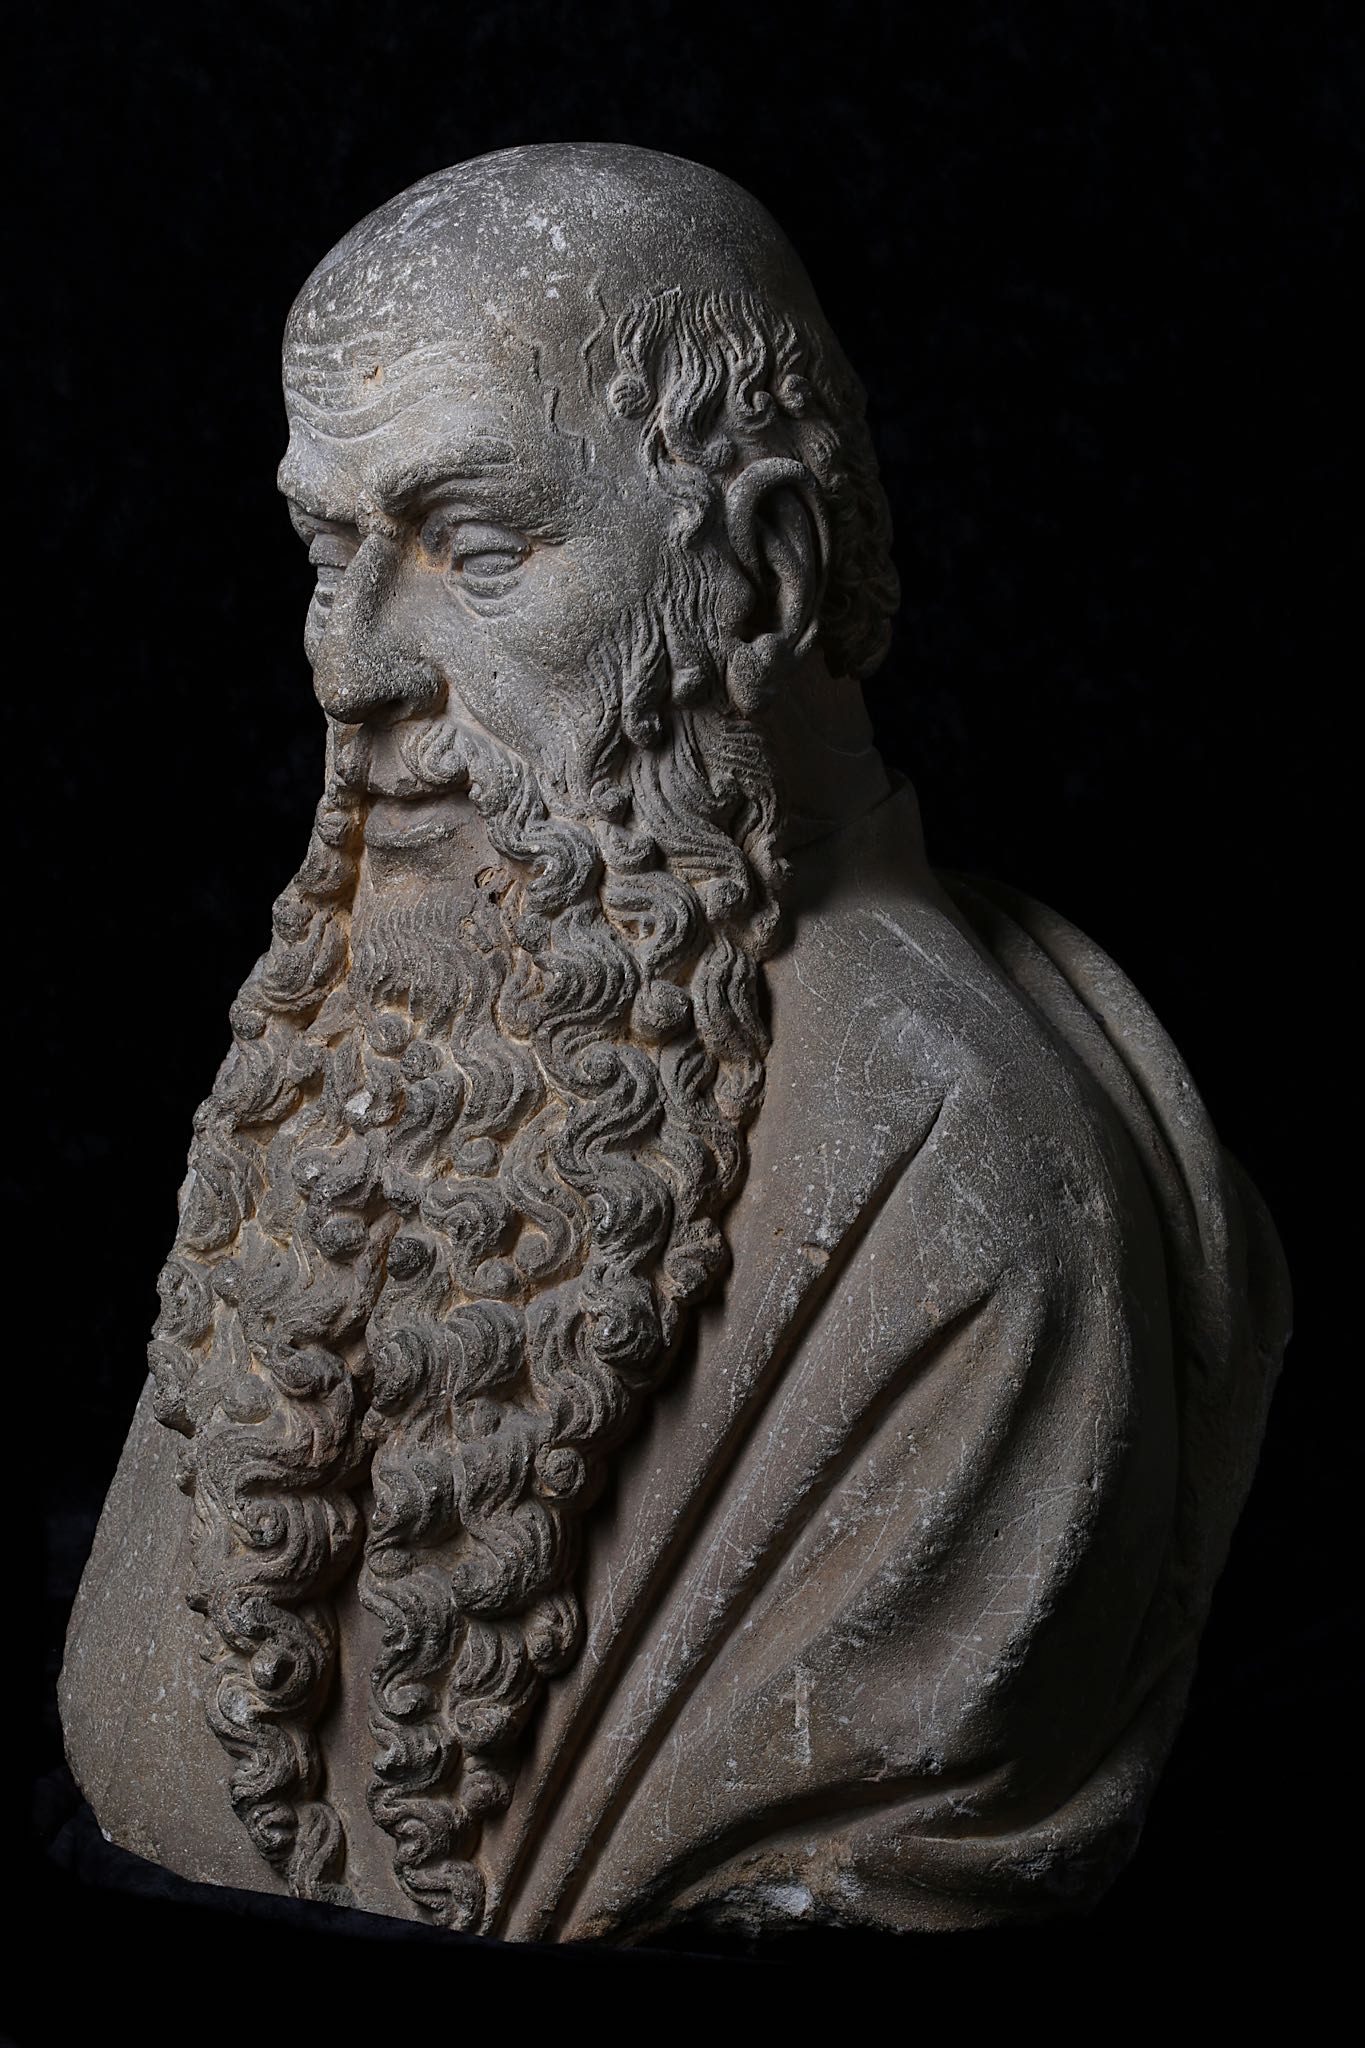 AN IMPORTANT LATE 15TH CENTURY ITALIAN CARVED SANDSTONE BUST OF A BEARDED MAN, CIRCLE OF ANGELO DI - Image 9 of 14